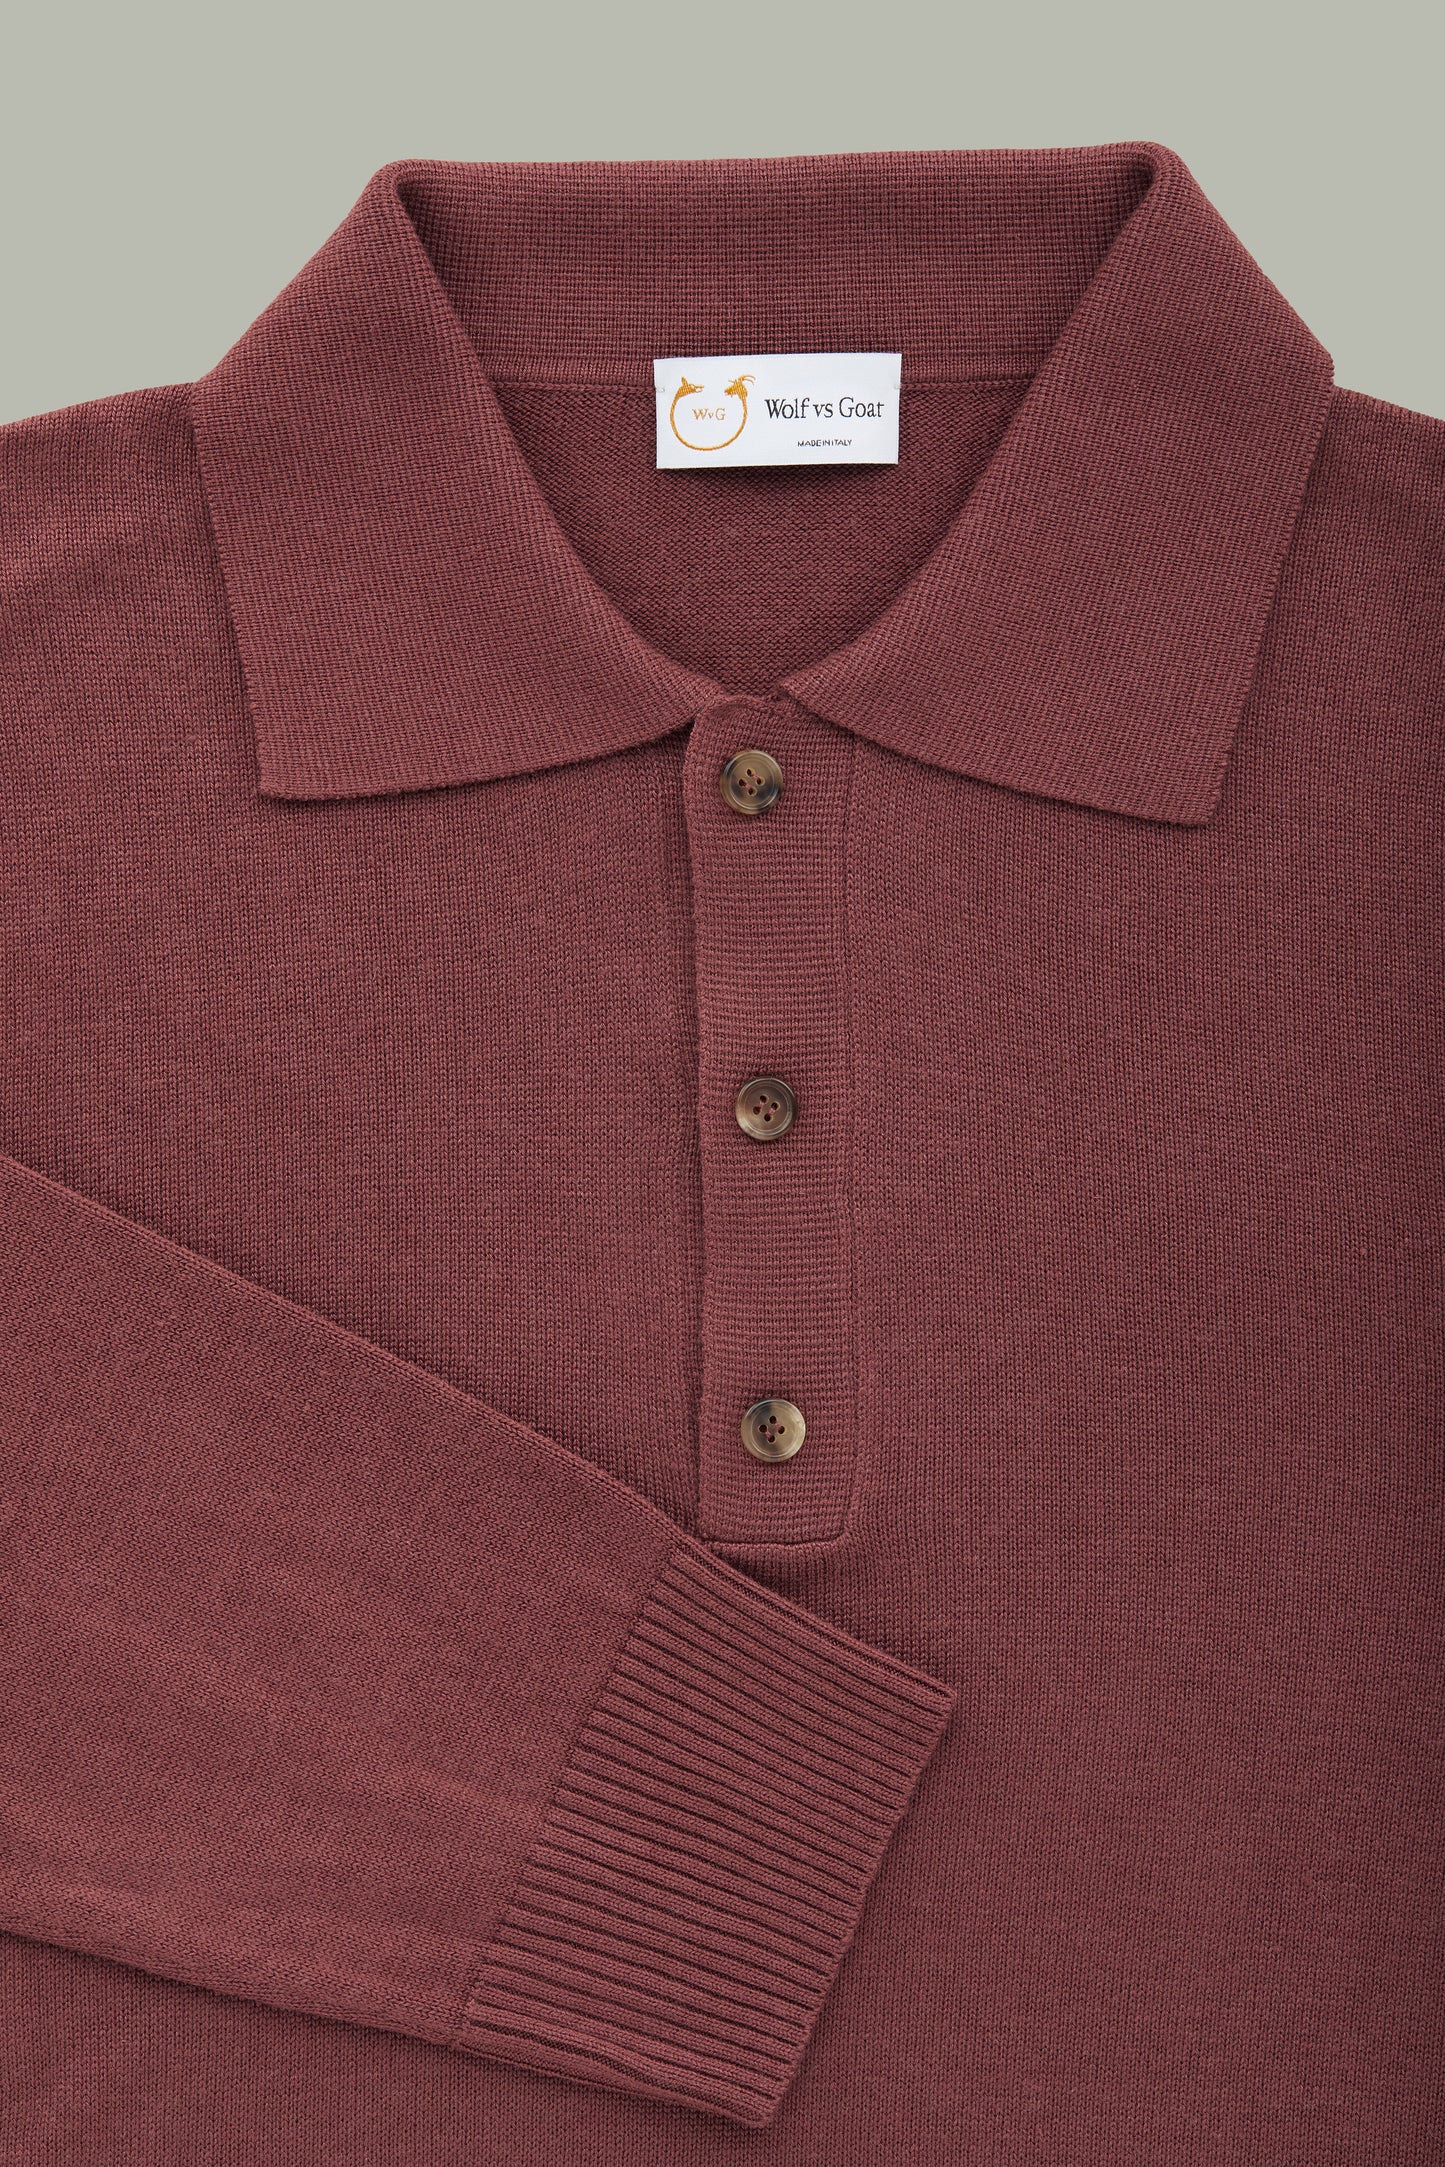 Long Sleeve Bamboo Cashmere Blend Knitted Polo Plum